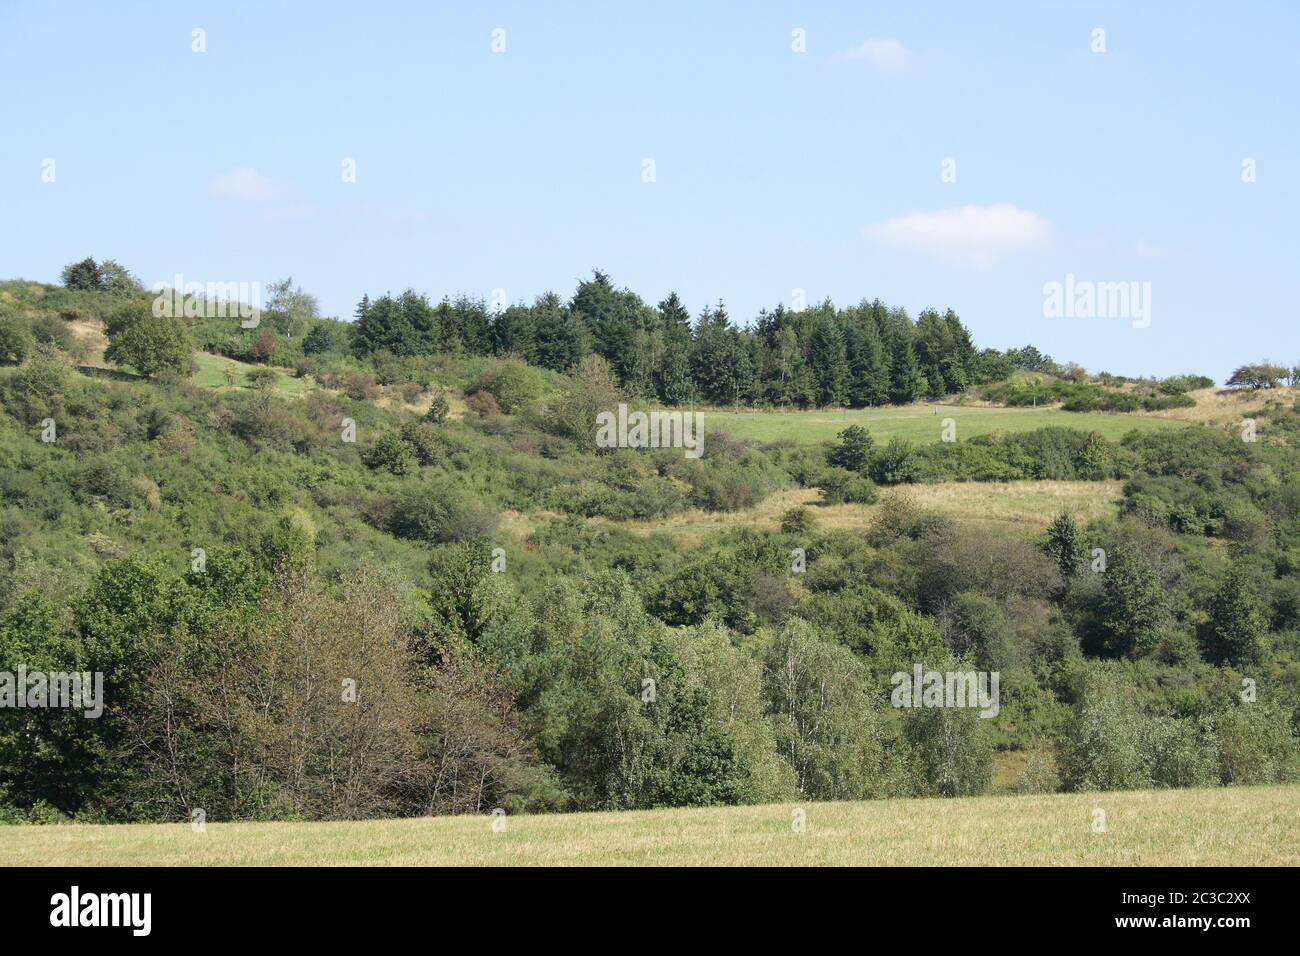 Mountain landscape with forest and meadows, blue sky in background Stock Photo